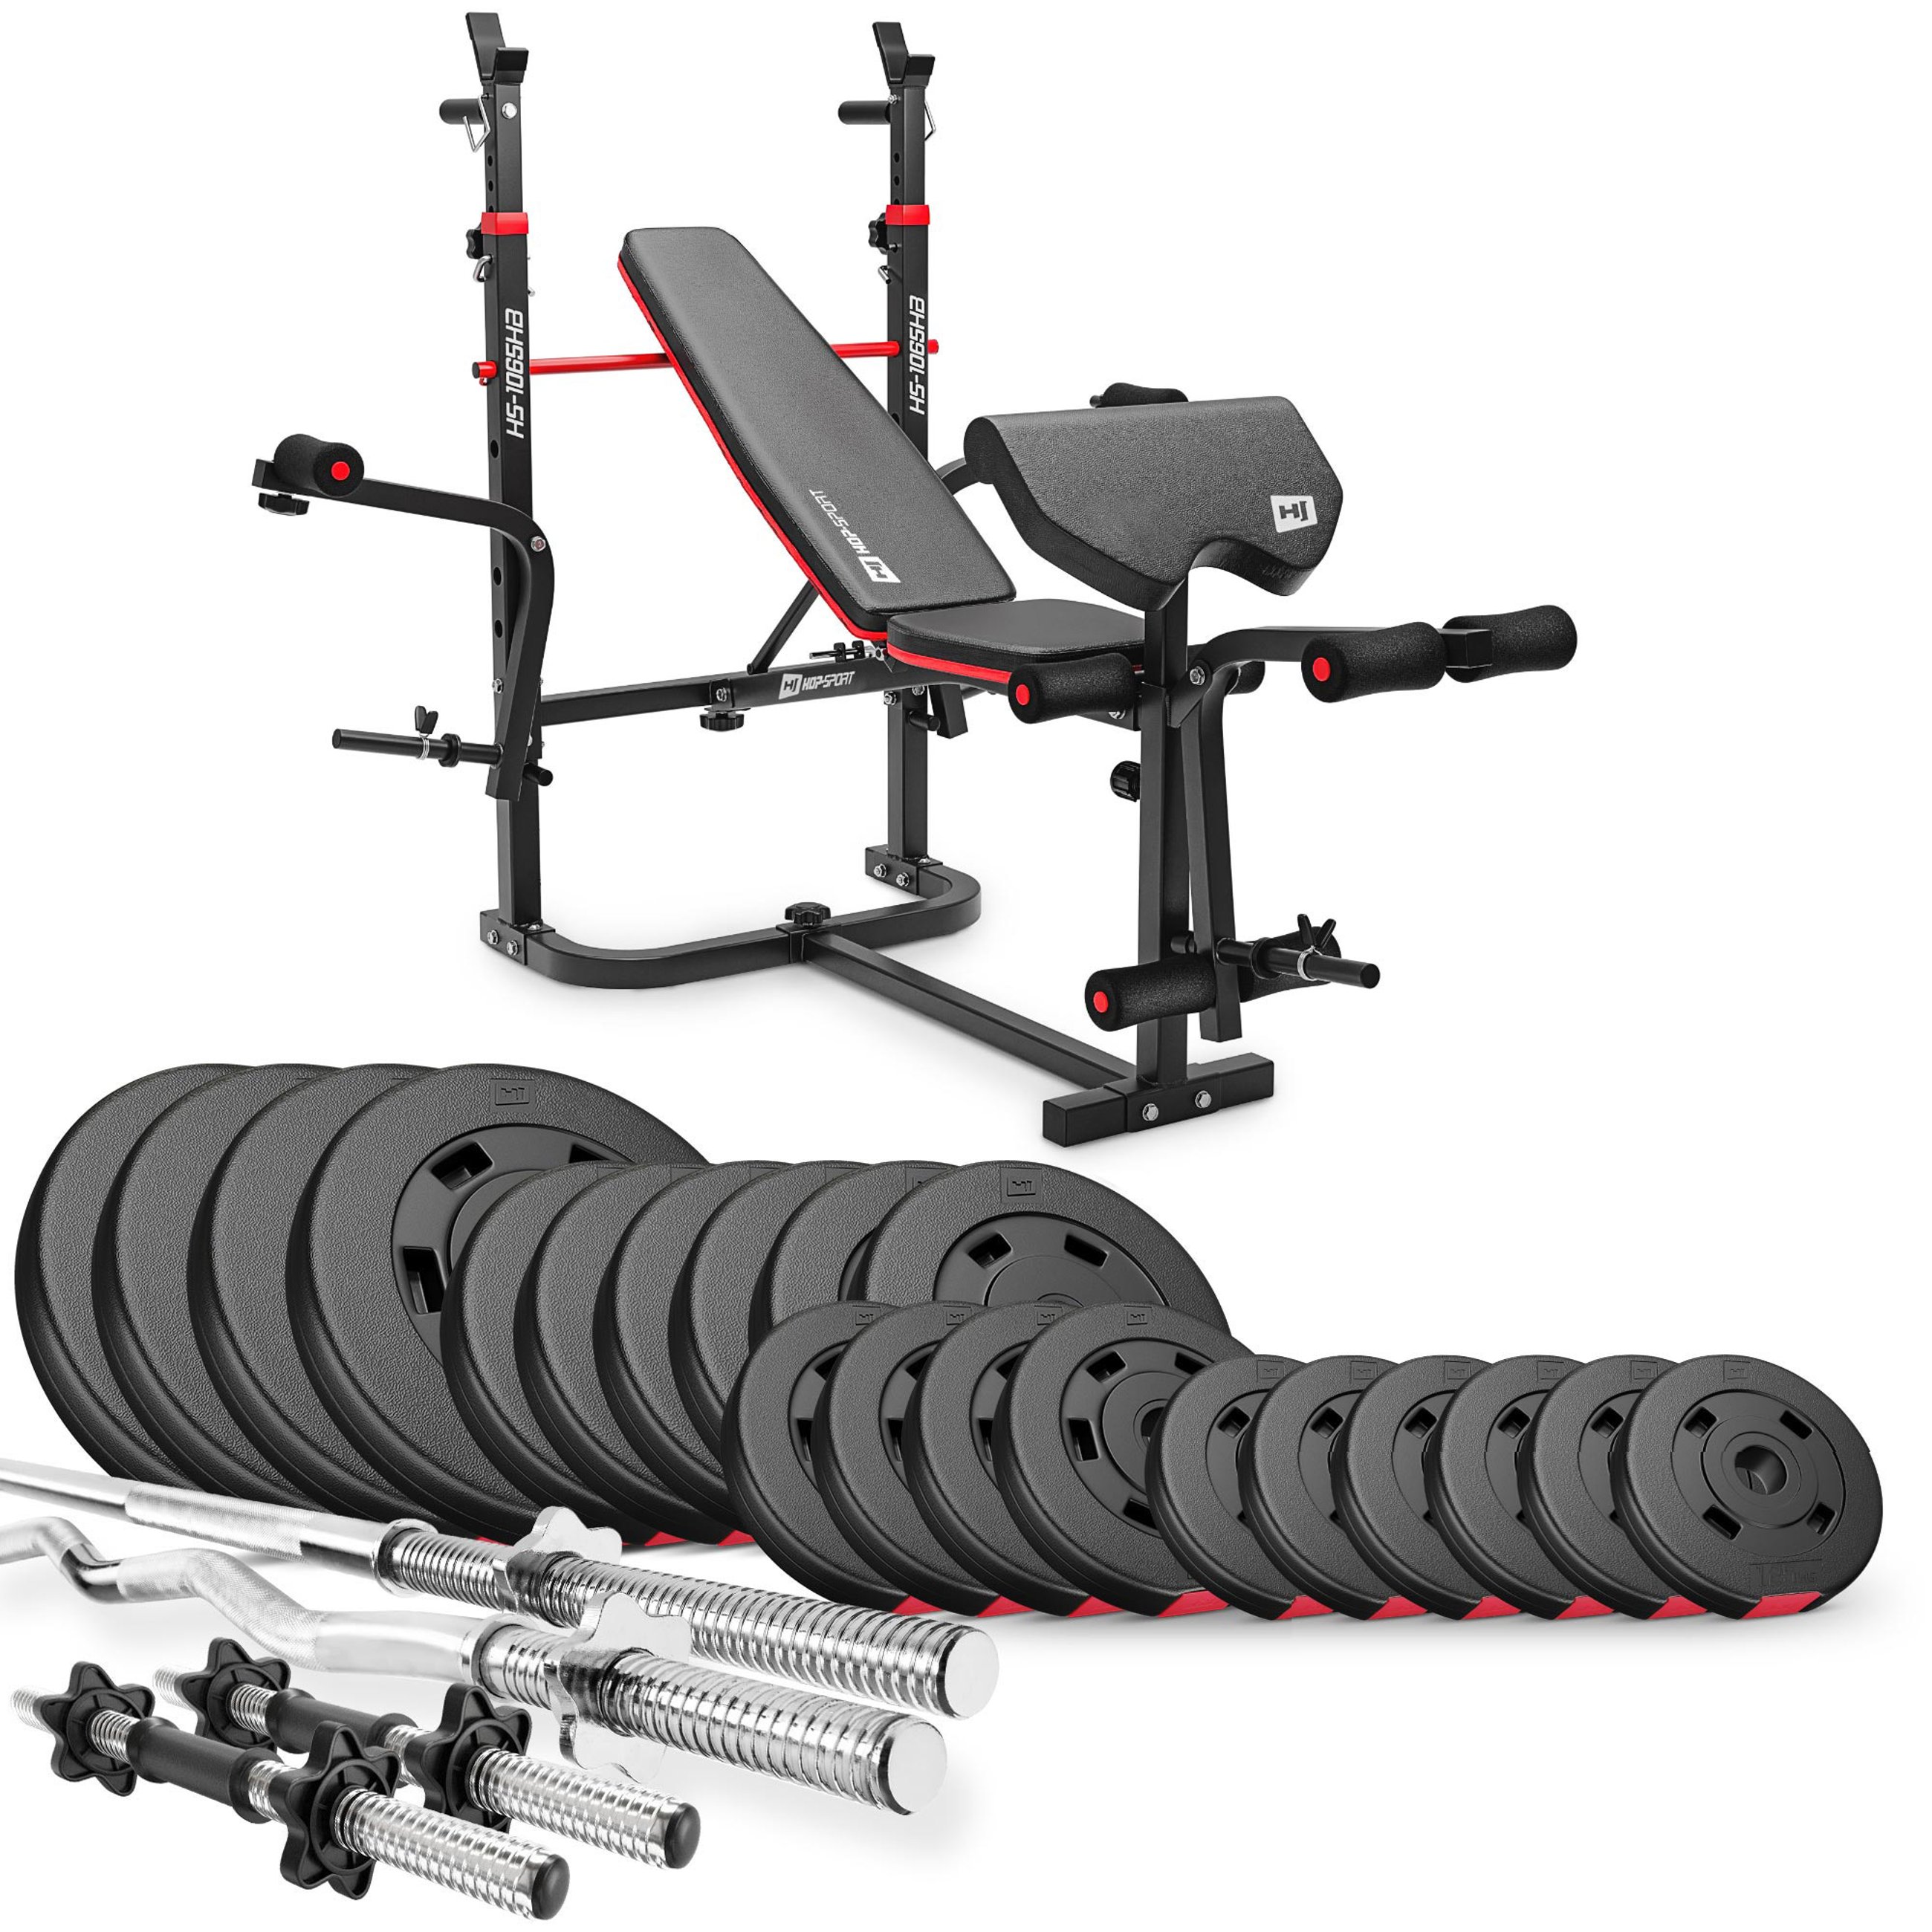 Premium 105 kg Barbell Set with HS-1065 Weight Bench